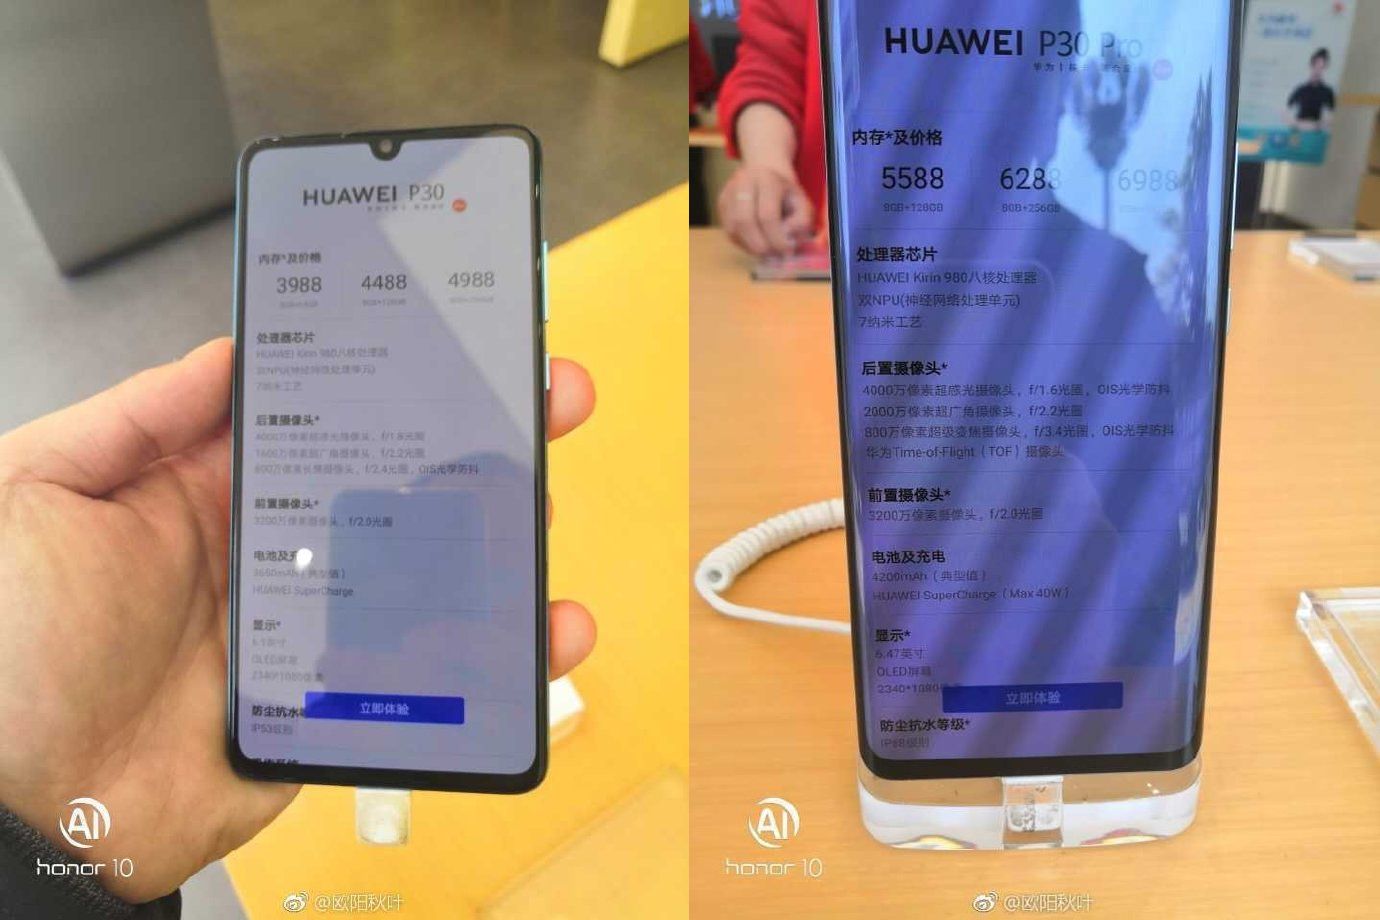 Huawei P30 And P30 Pro China Price Leaked Ahead Of April 11